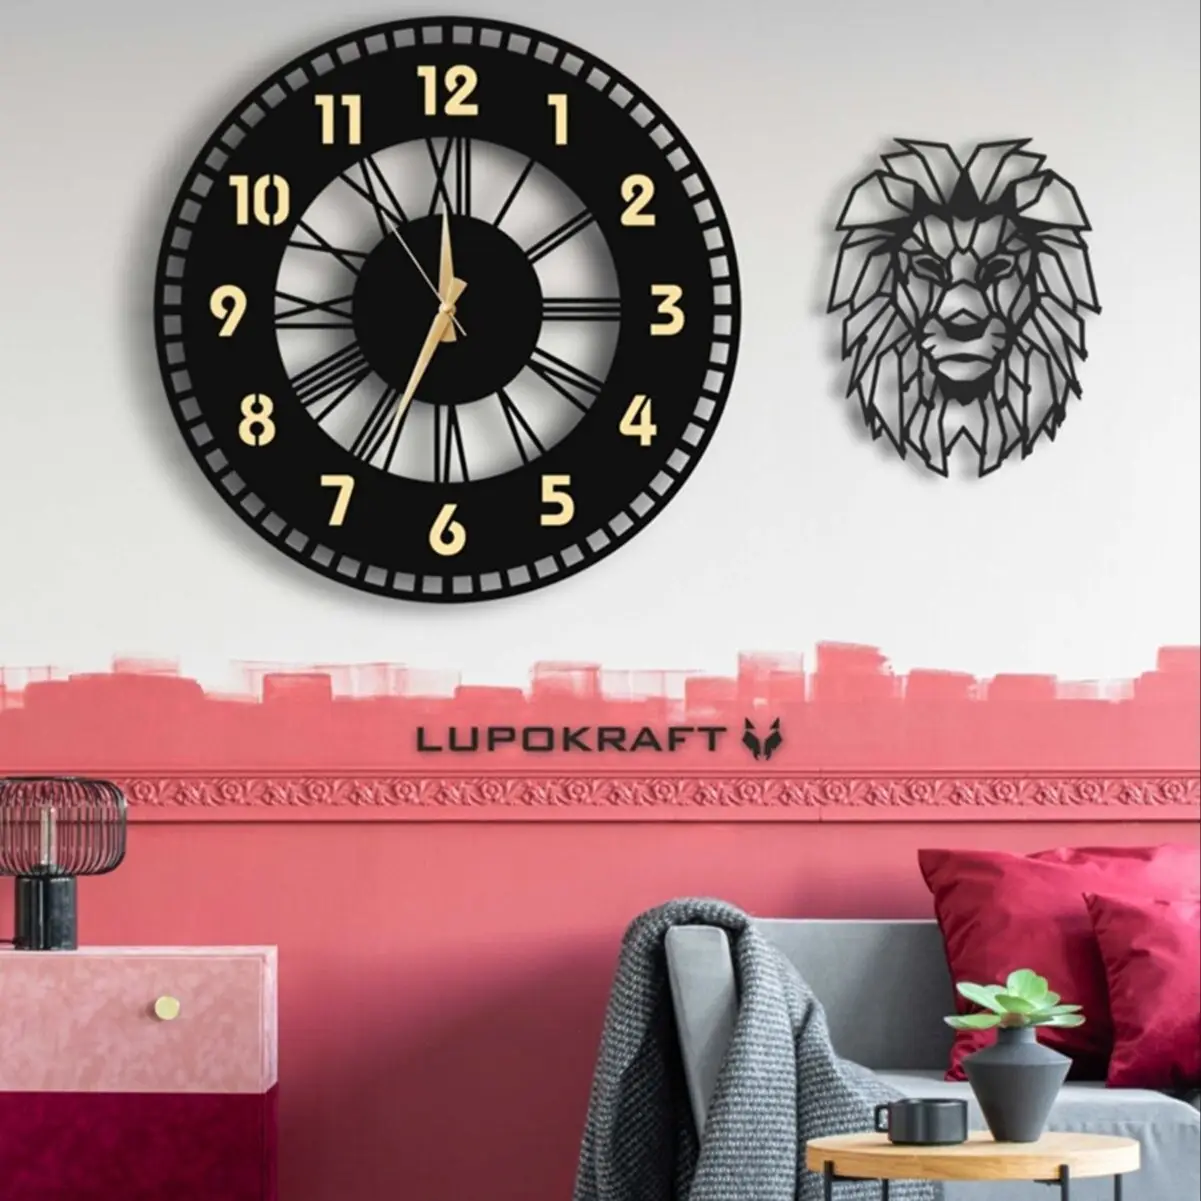 Modern Design Mirrored Wall Clock and Animal Figure Decorative Home Office Living Room Silent Flow Wall Clock and Decoration